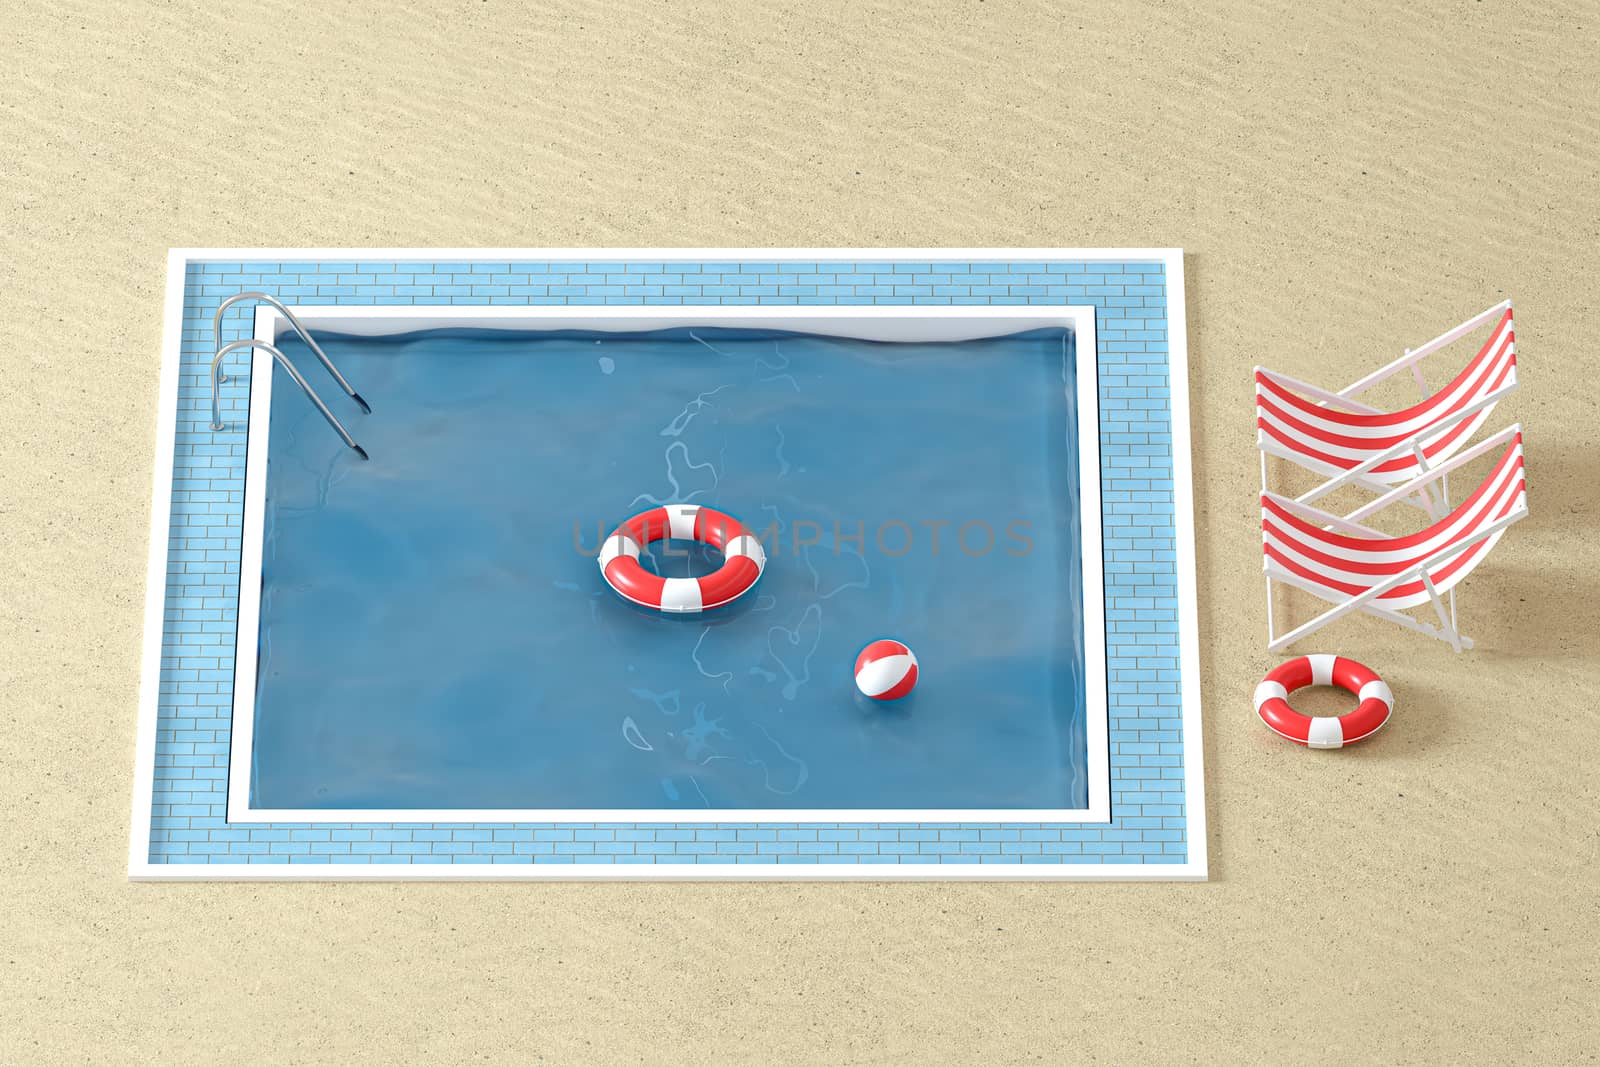 A swimming pool on the sand beach, 3d rendering. by vinkfan